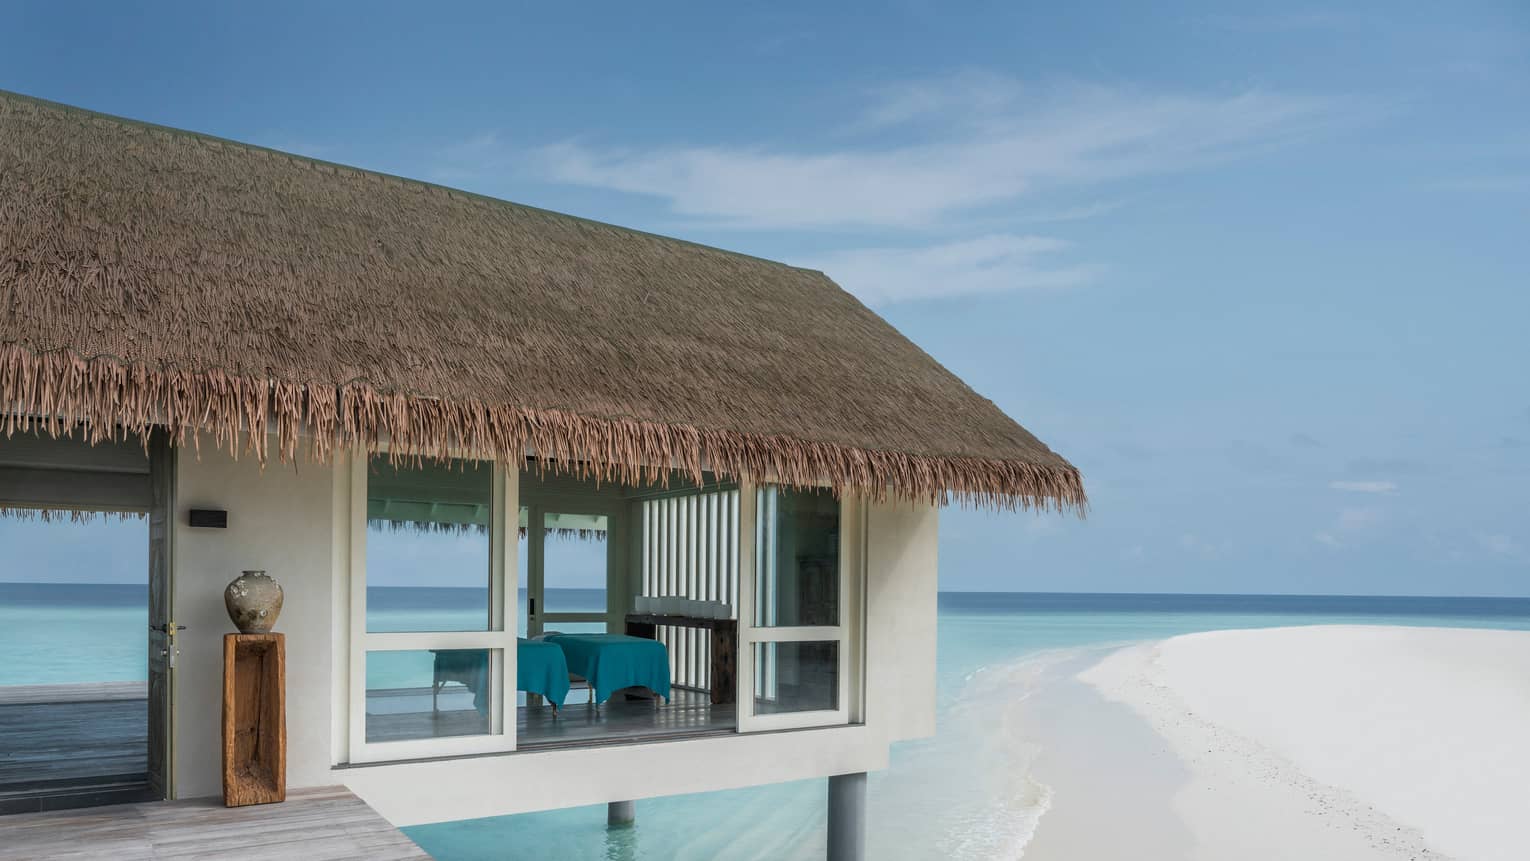 Exterior view of thatched roof spa with massage beds in open-air room over lagoon